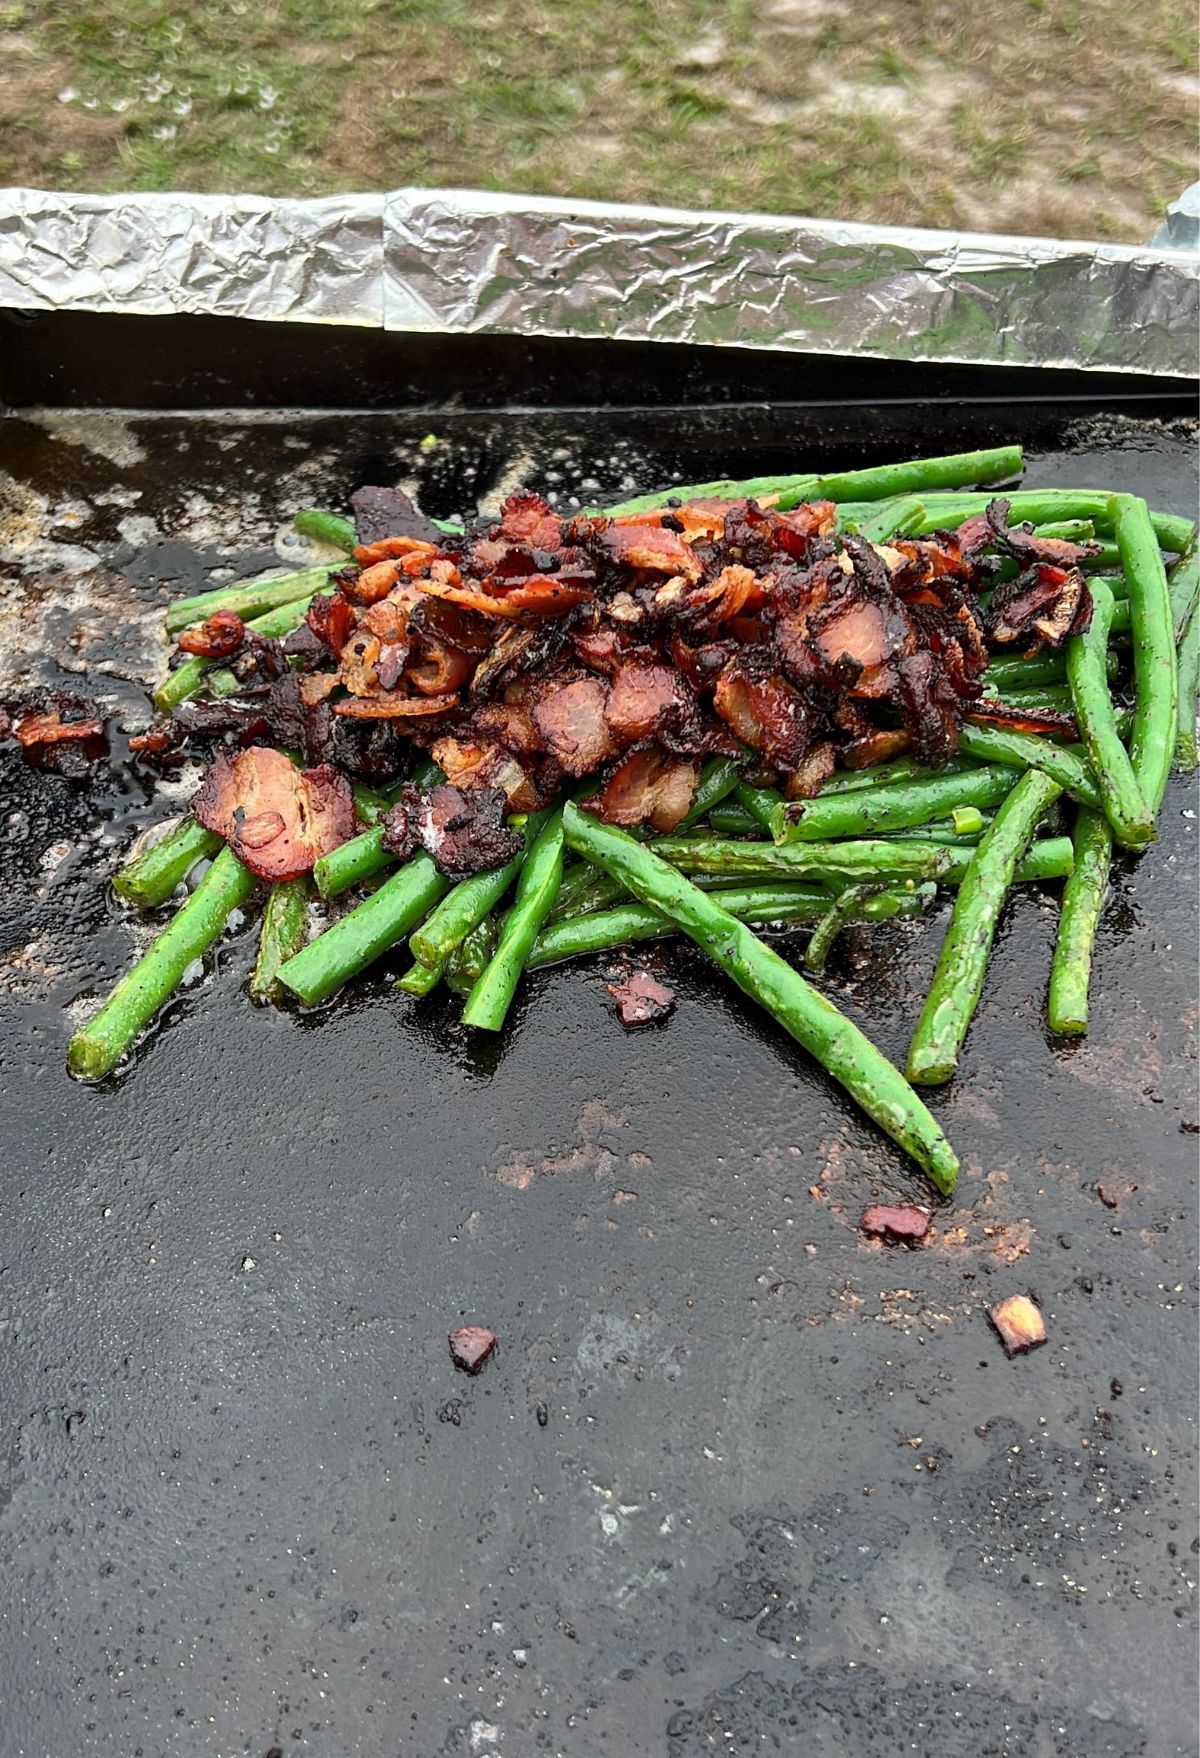 Grilled green beans and chopped bacon cooking on an outdoor flat grill, with visible seasoning.